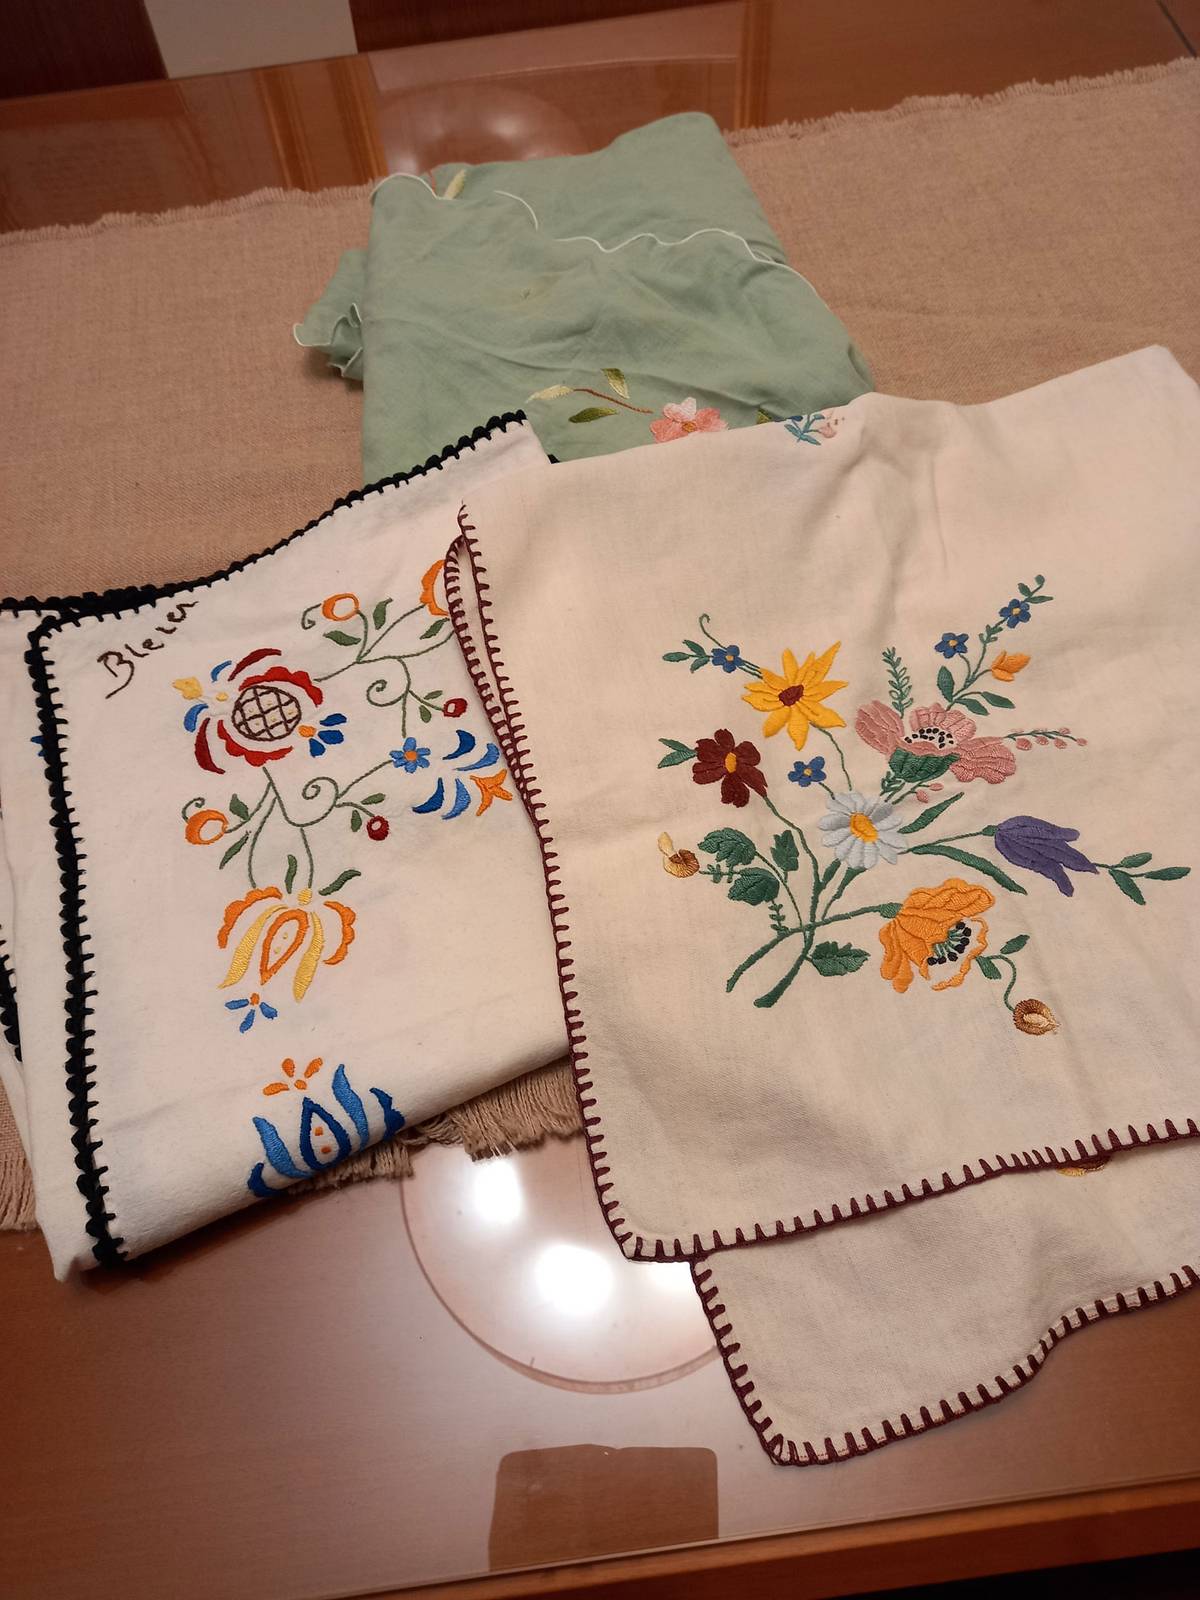 The author's grandmother's embroidery 